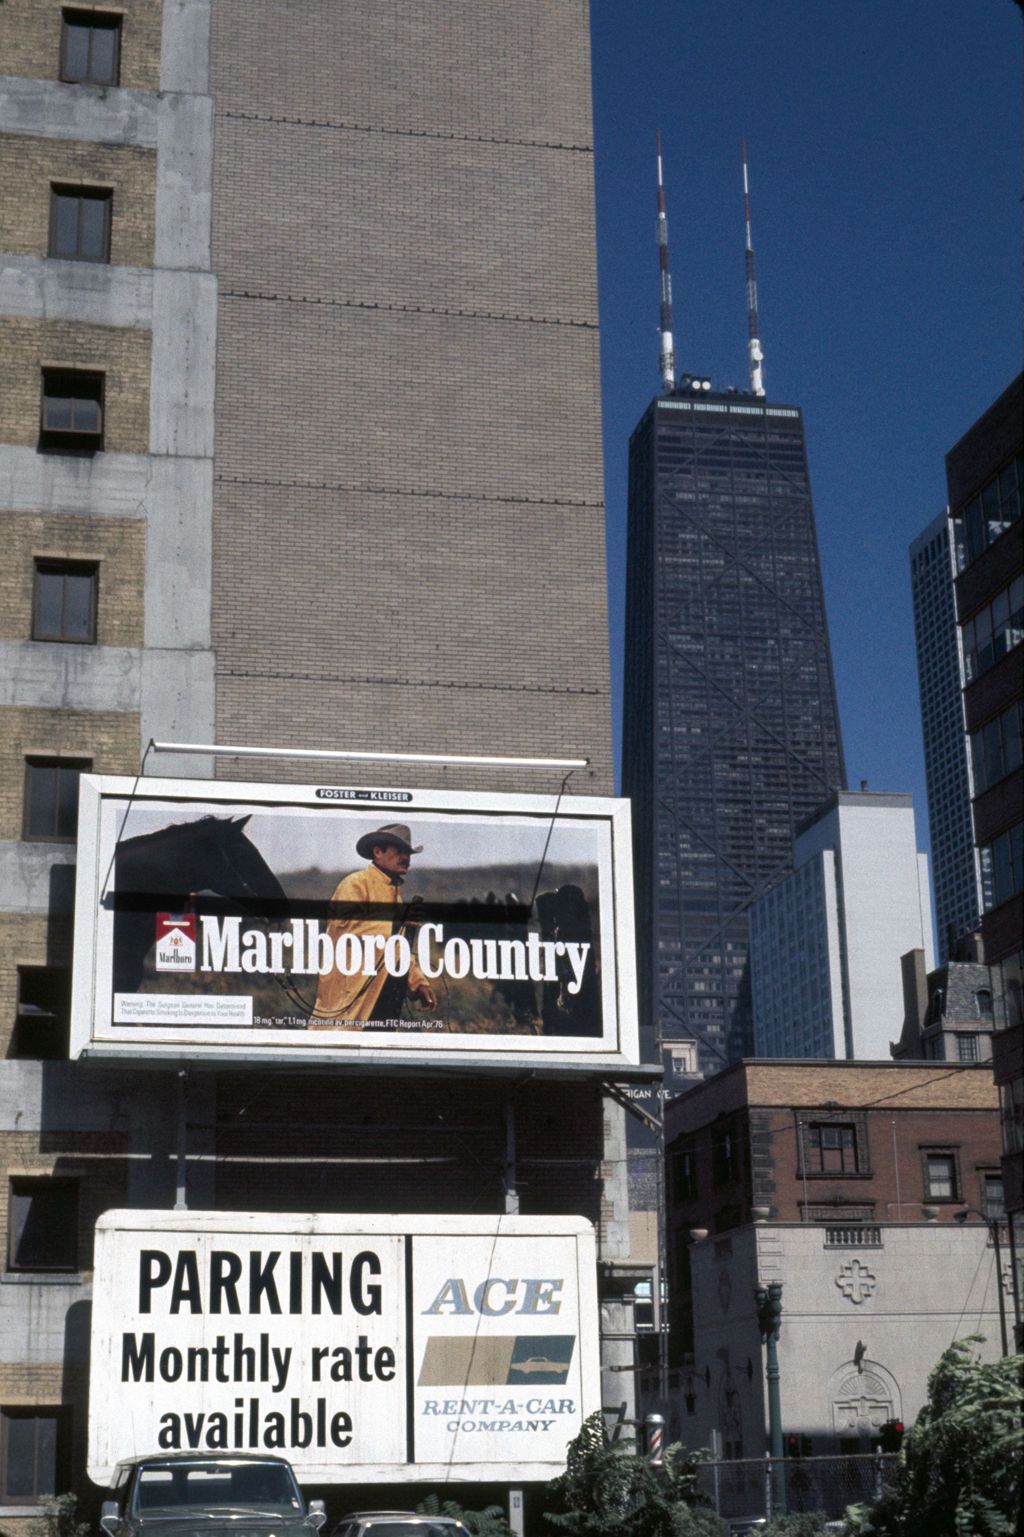 Billboard advertisements for cigarettes and rental cars